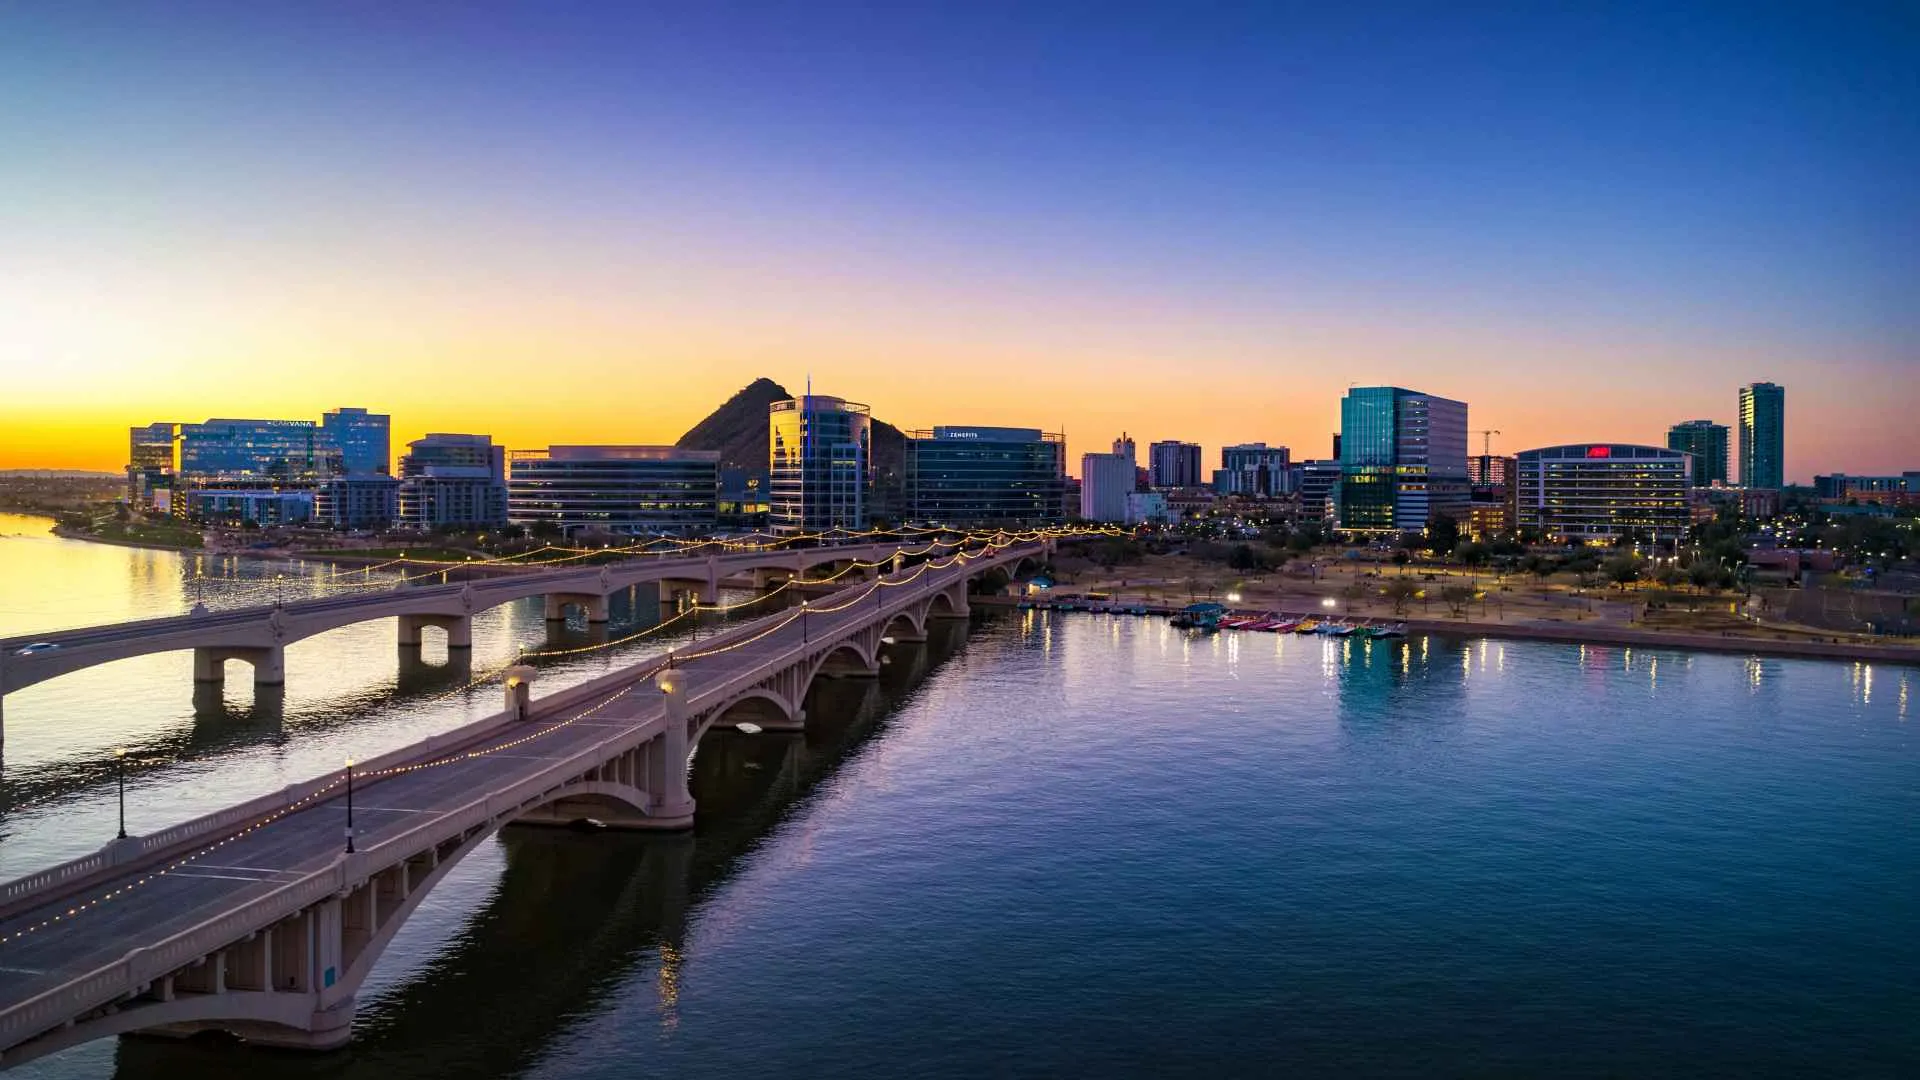 Downtown Tempe, Arizona at dawn with bridges and Tempe Town Lake in the foreground.